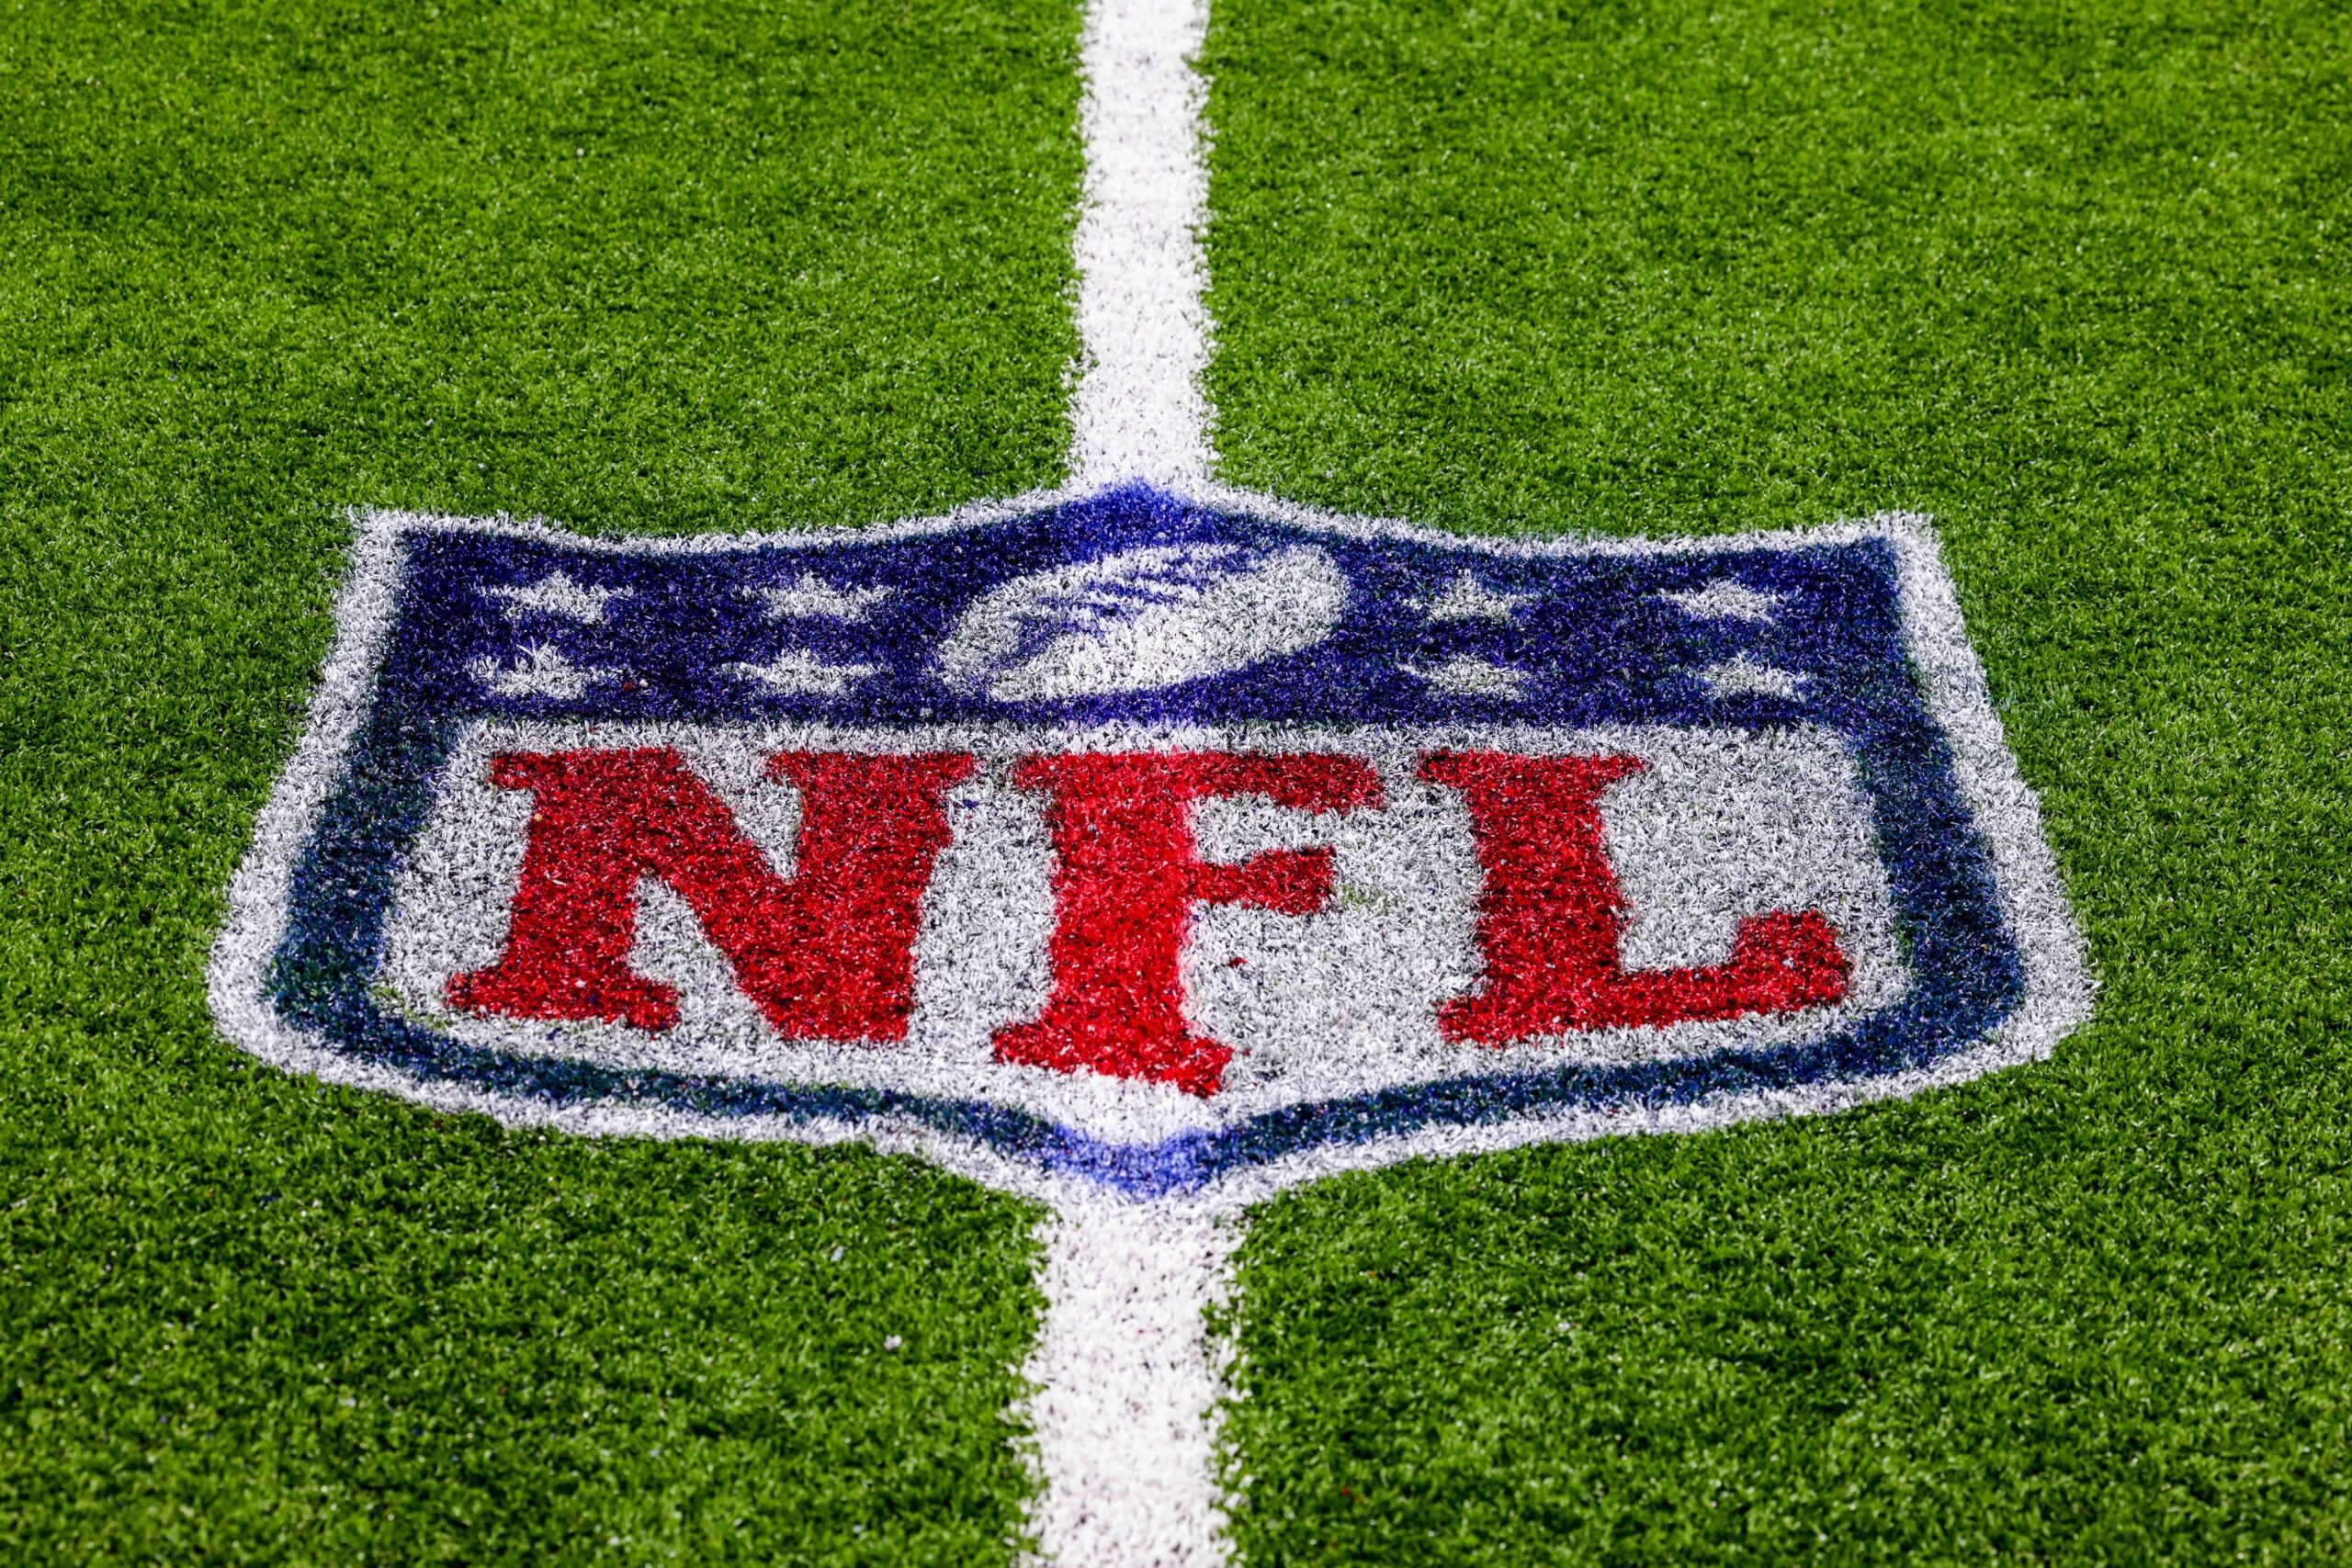 today's nfl channel schedule